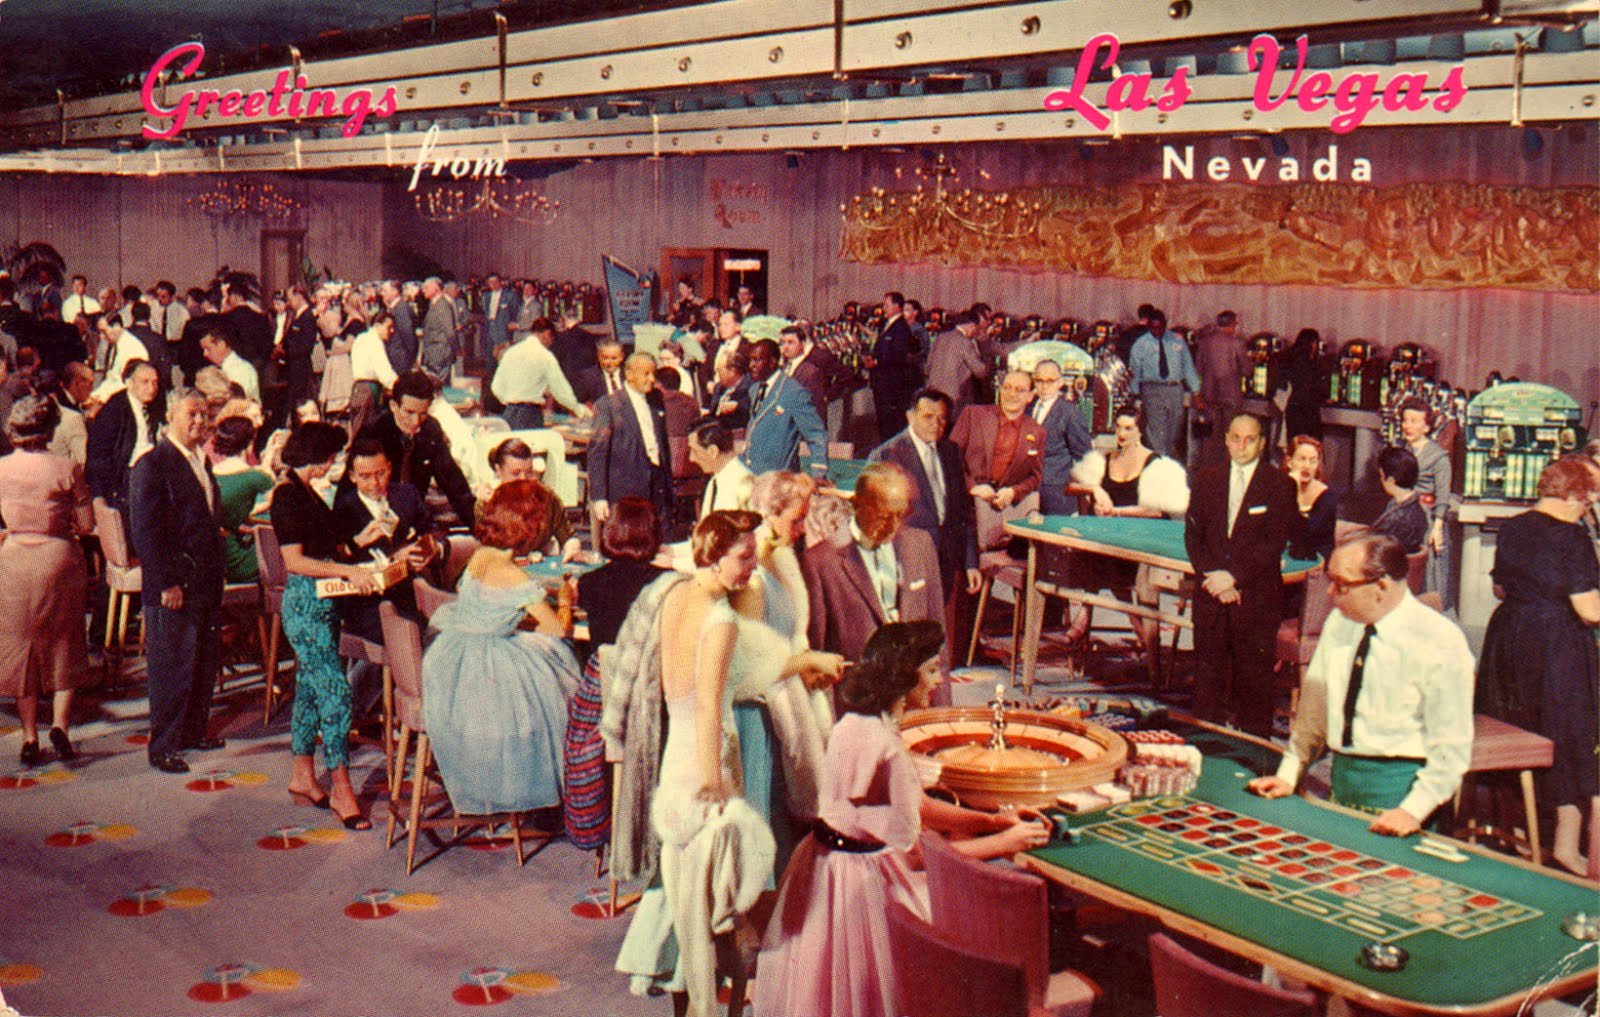 Vintage Photos of Las Vegas in the 1950s and 1960s ~ vintage everyday